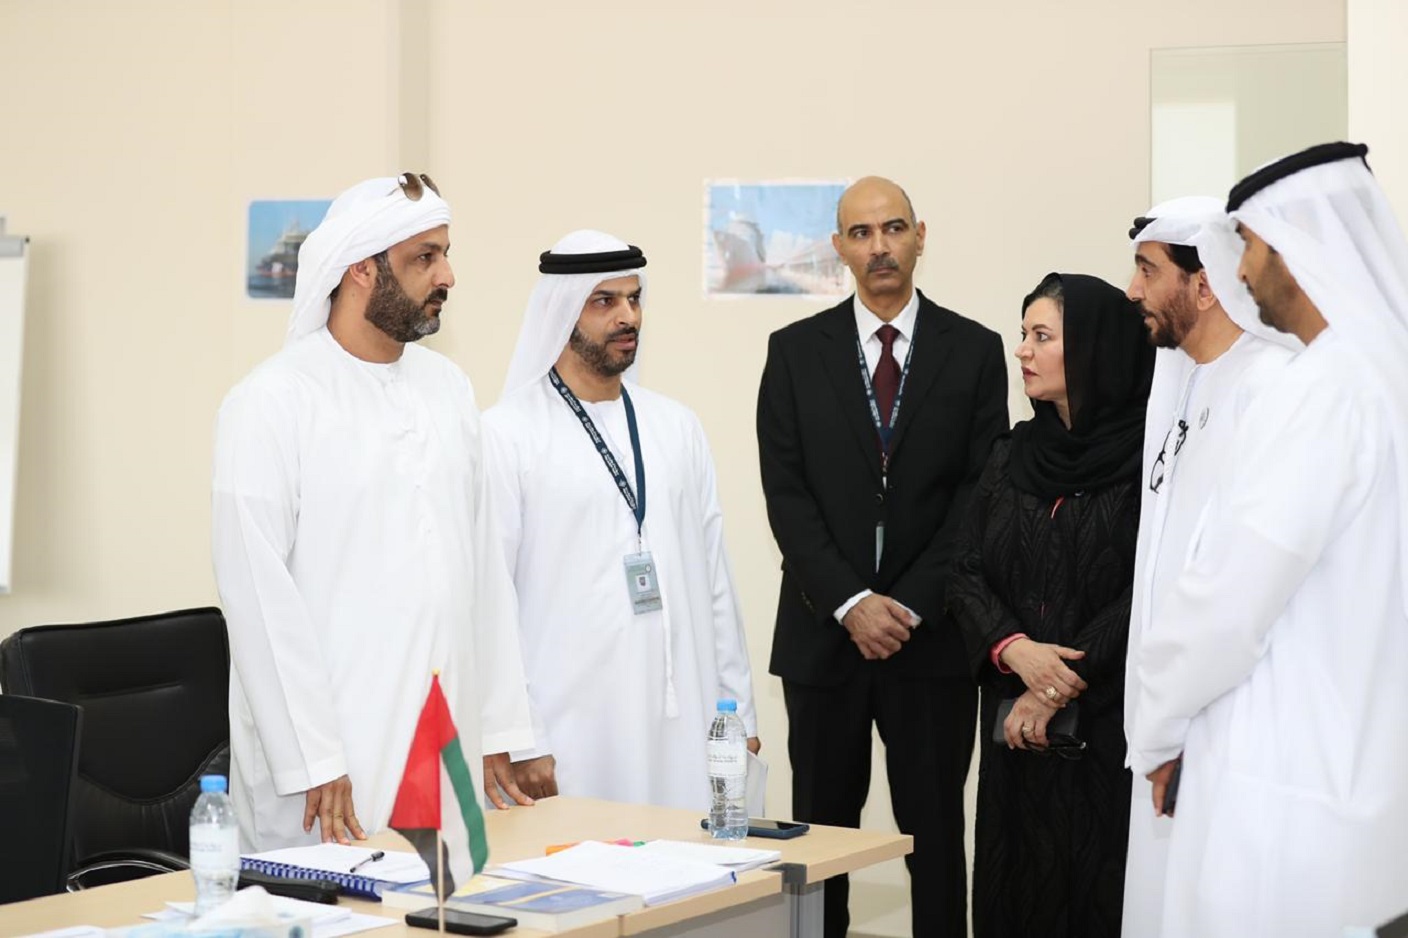 Federal Transport Authority – Land & Maritime Discusses With Abu Dhabi Ports Ways To Strengthen Maritime Sector